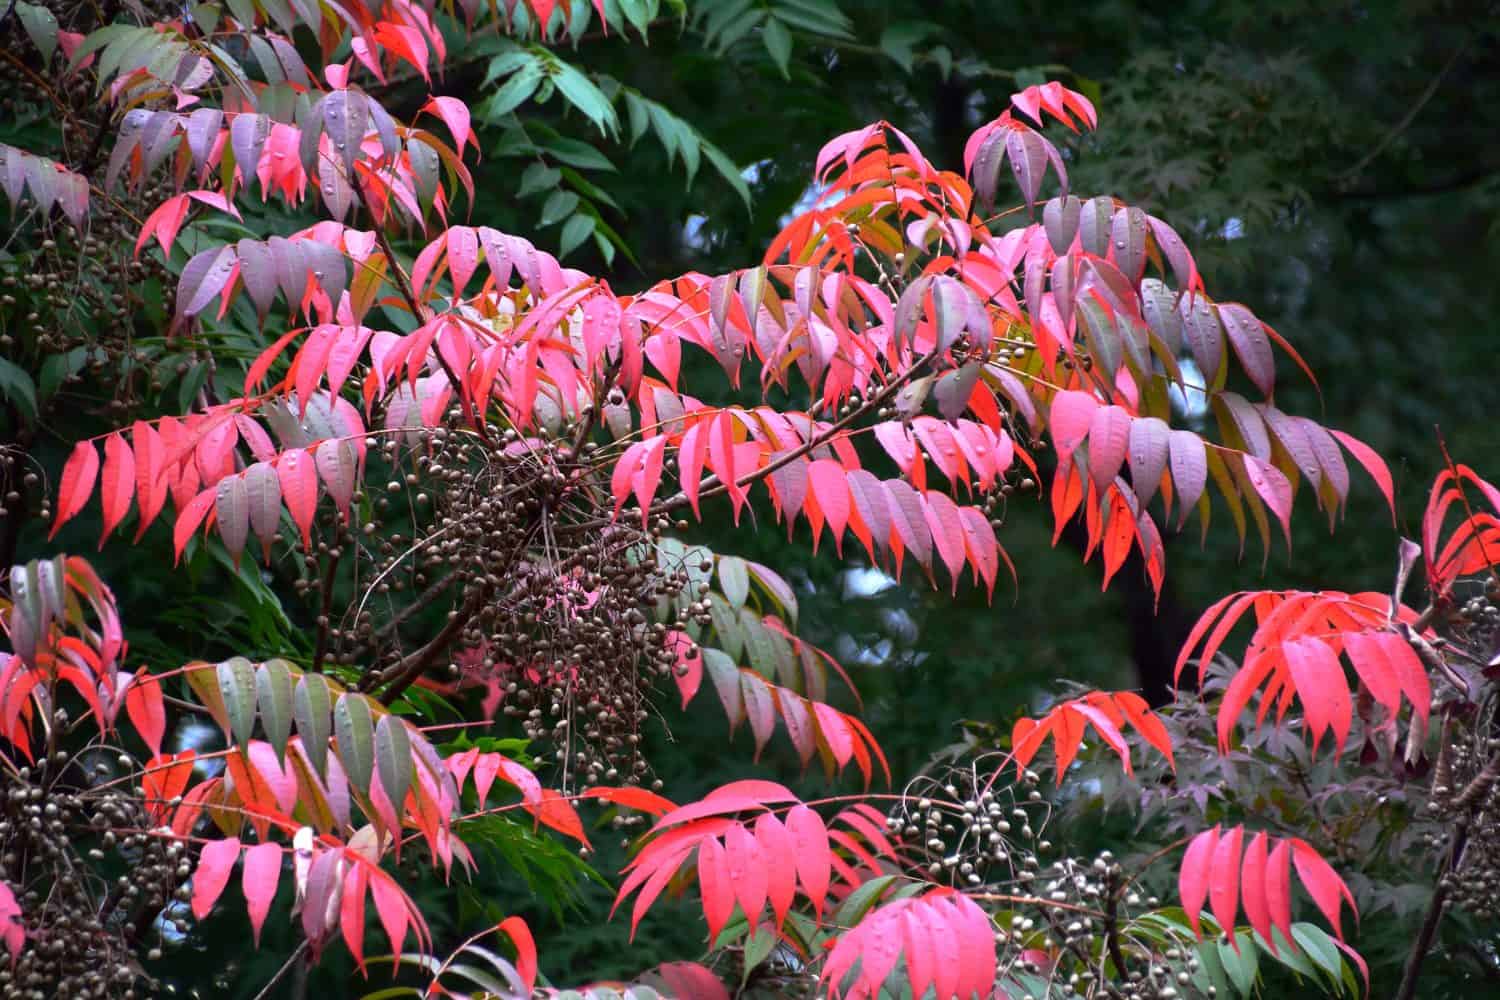 Colored leaves and fruits of Japan wax tree (Toxicodendron succedaneum)